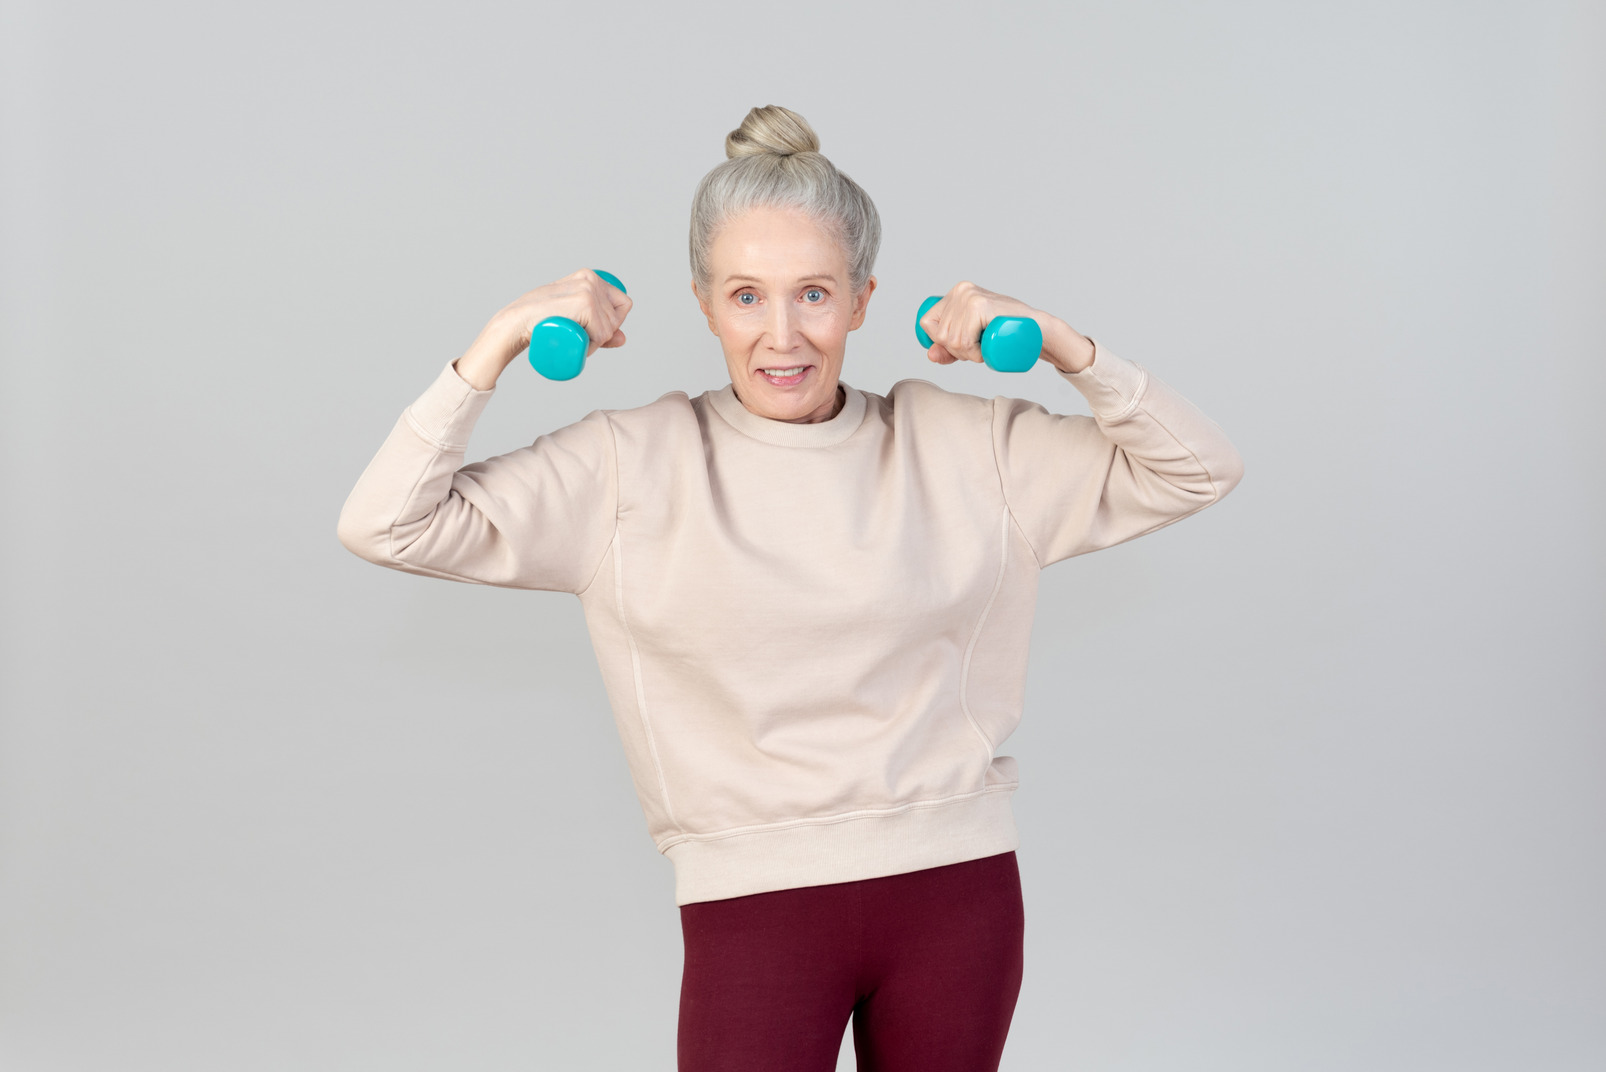 Old woman holding hand weights with her hands spread